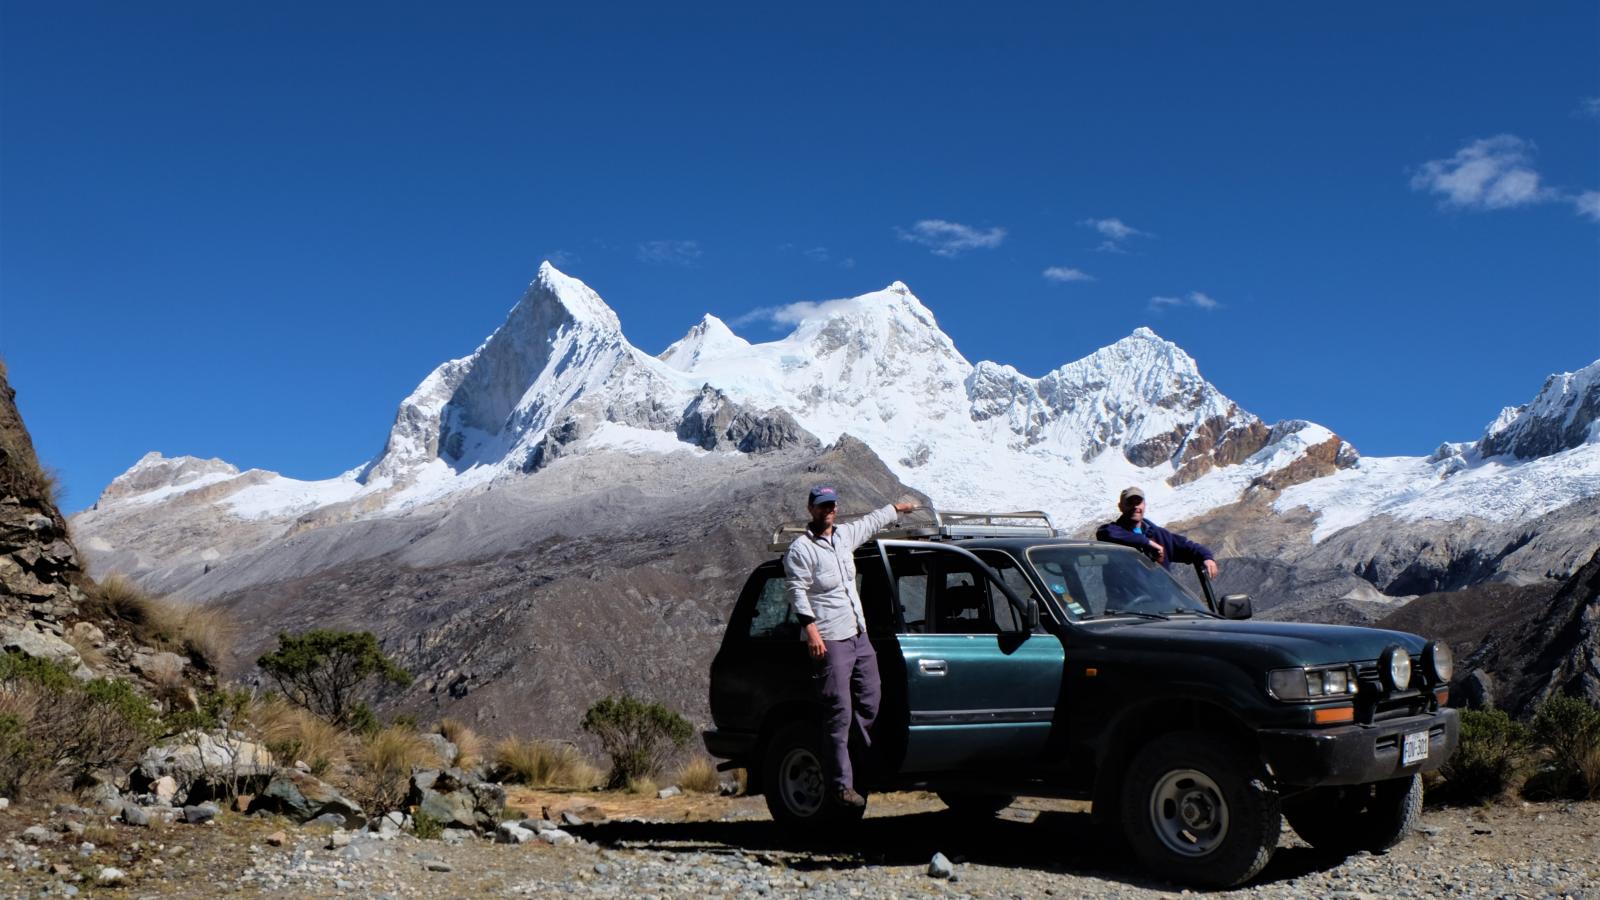 Two men standing on a car in front of a snowcapped Peruvian mountain